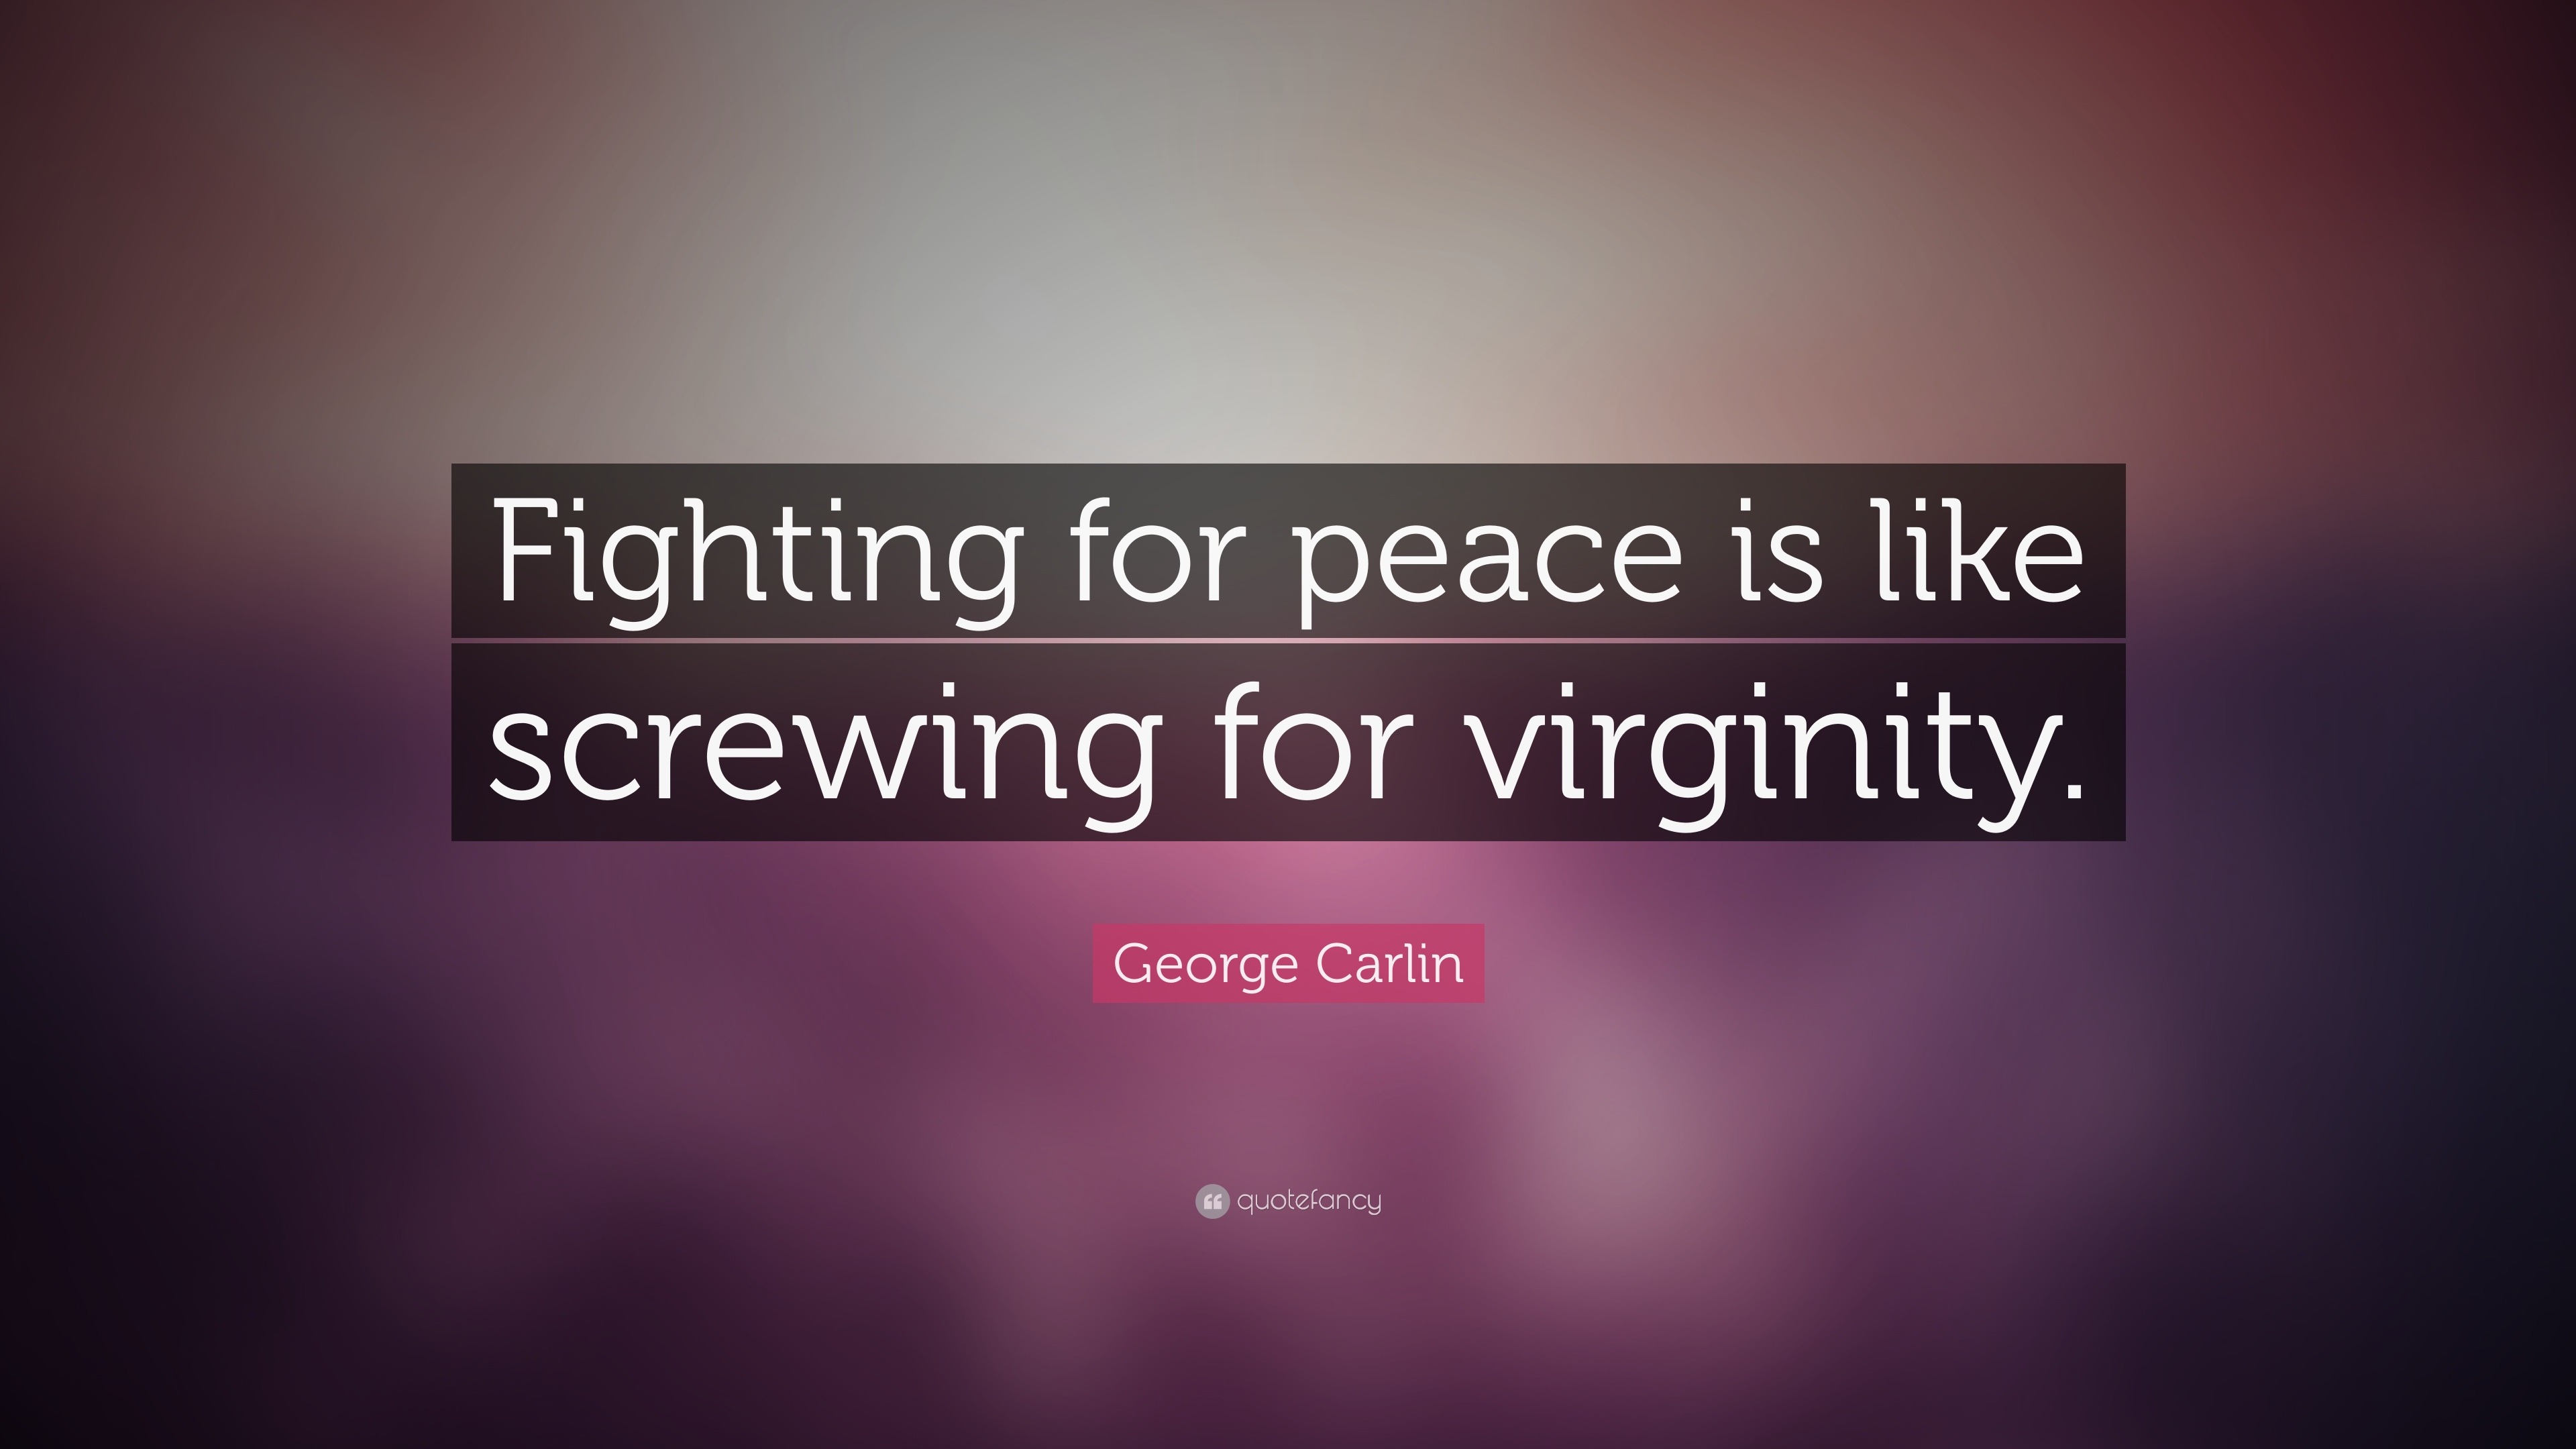 Fighting for peace is like screwing for virginity